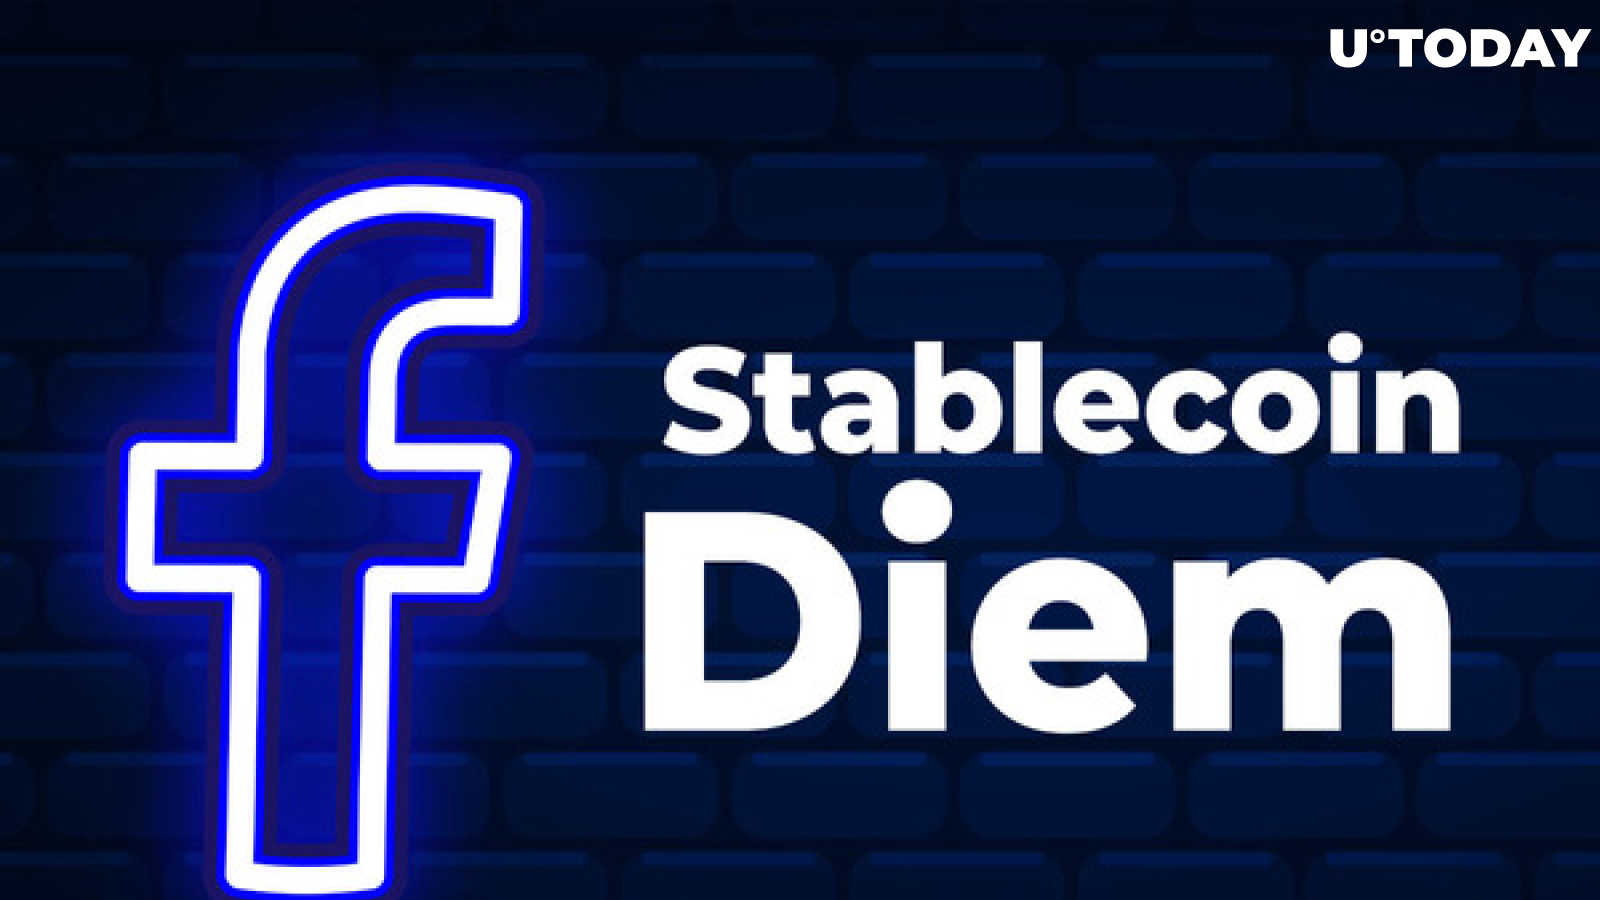 Facebook to Release USD-Backed Stablecoin Diem for Trials This Year – Rebranded Libra